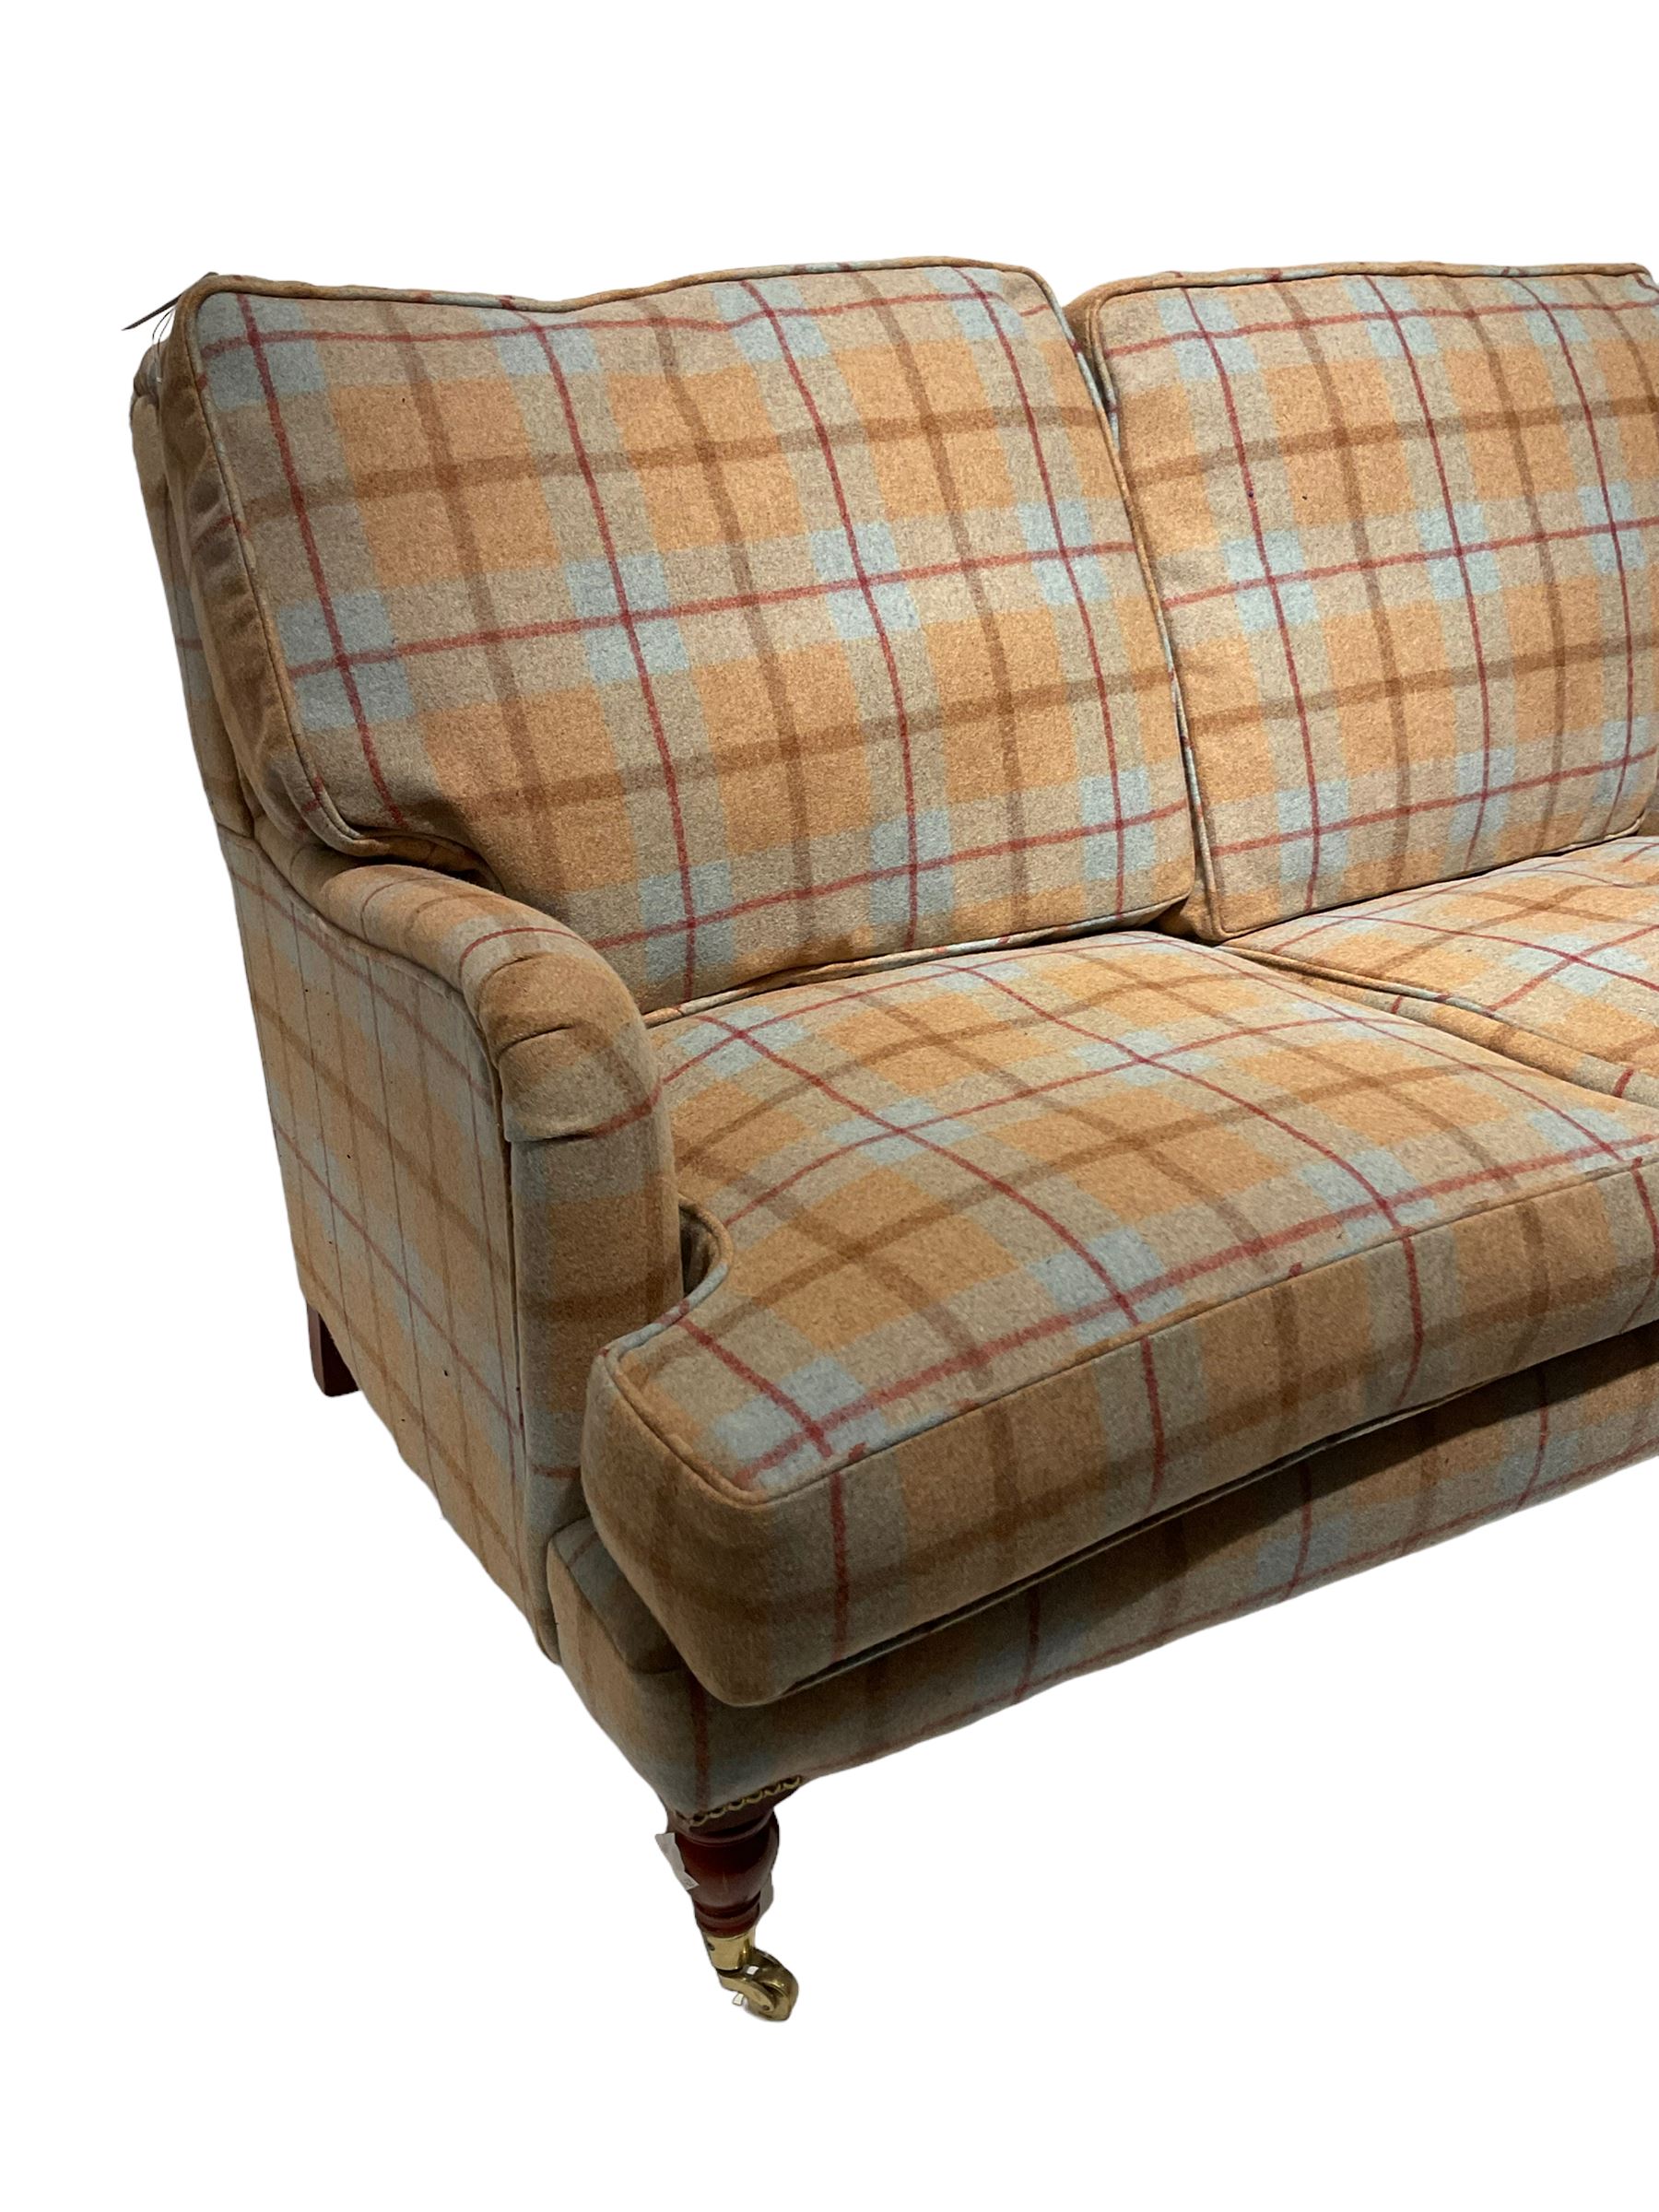 Howard design feather filled tartan pattern two seat sofa on Victorian style turned legs with castor - Image 3 of 5